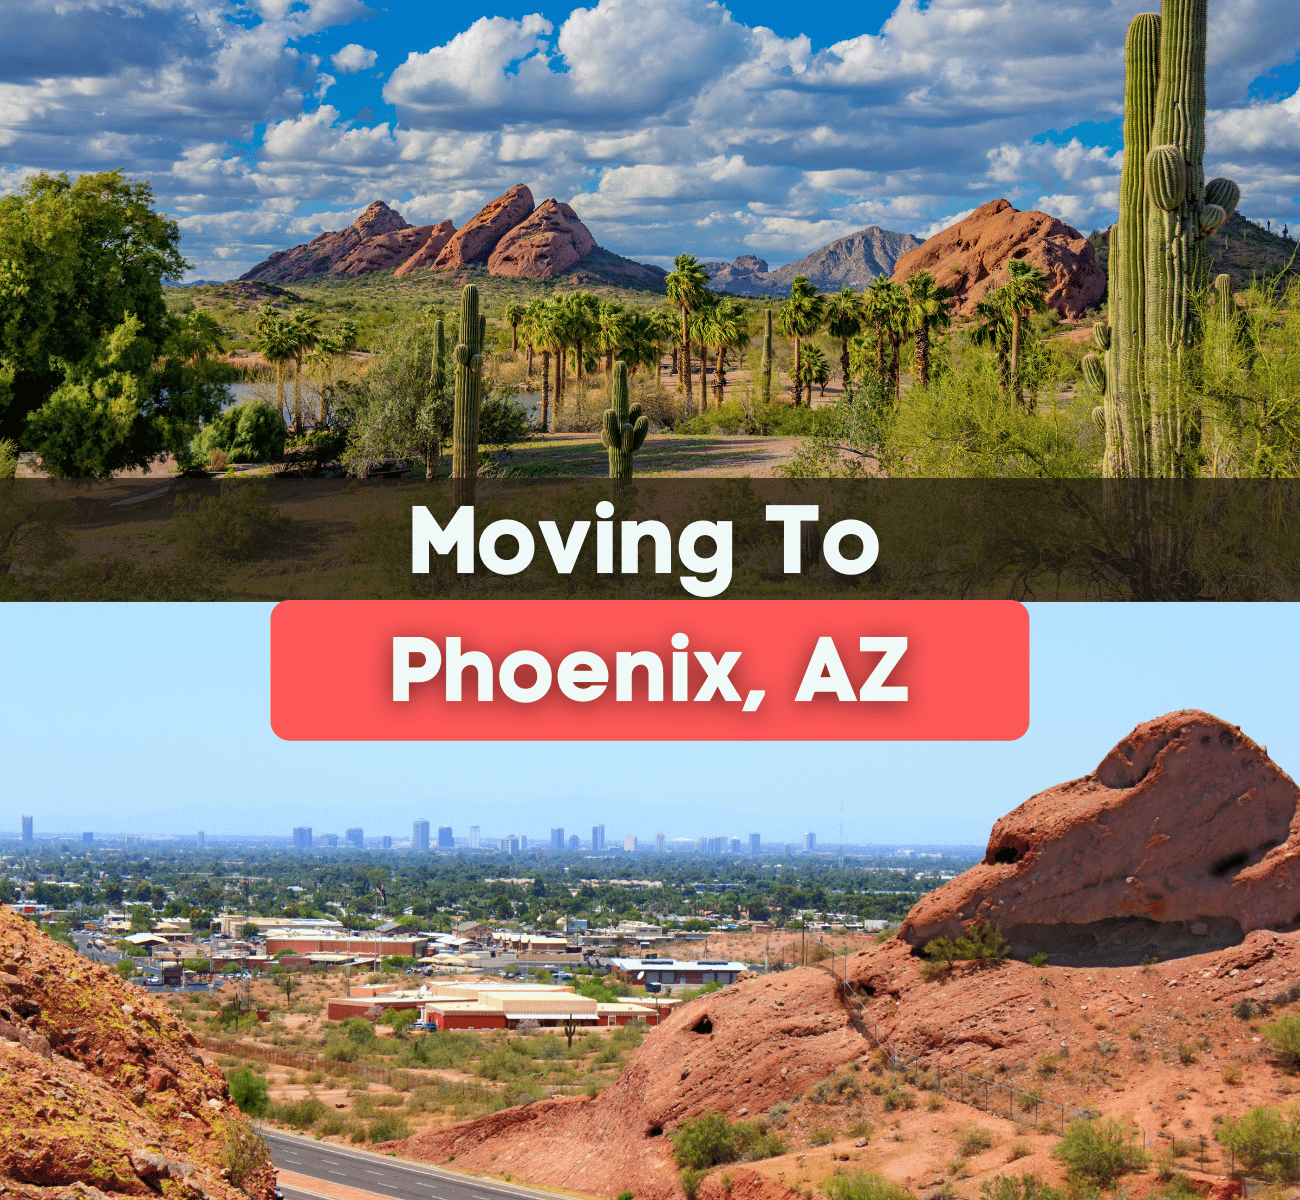 moving to Phoenix, AZ graphic with city view, red rocks, and cacti